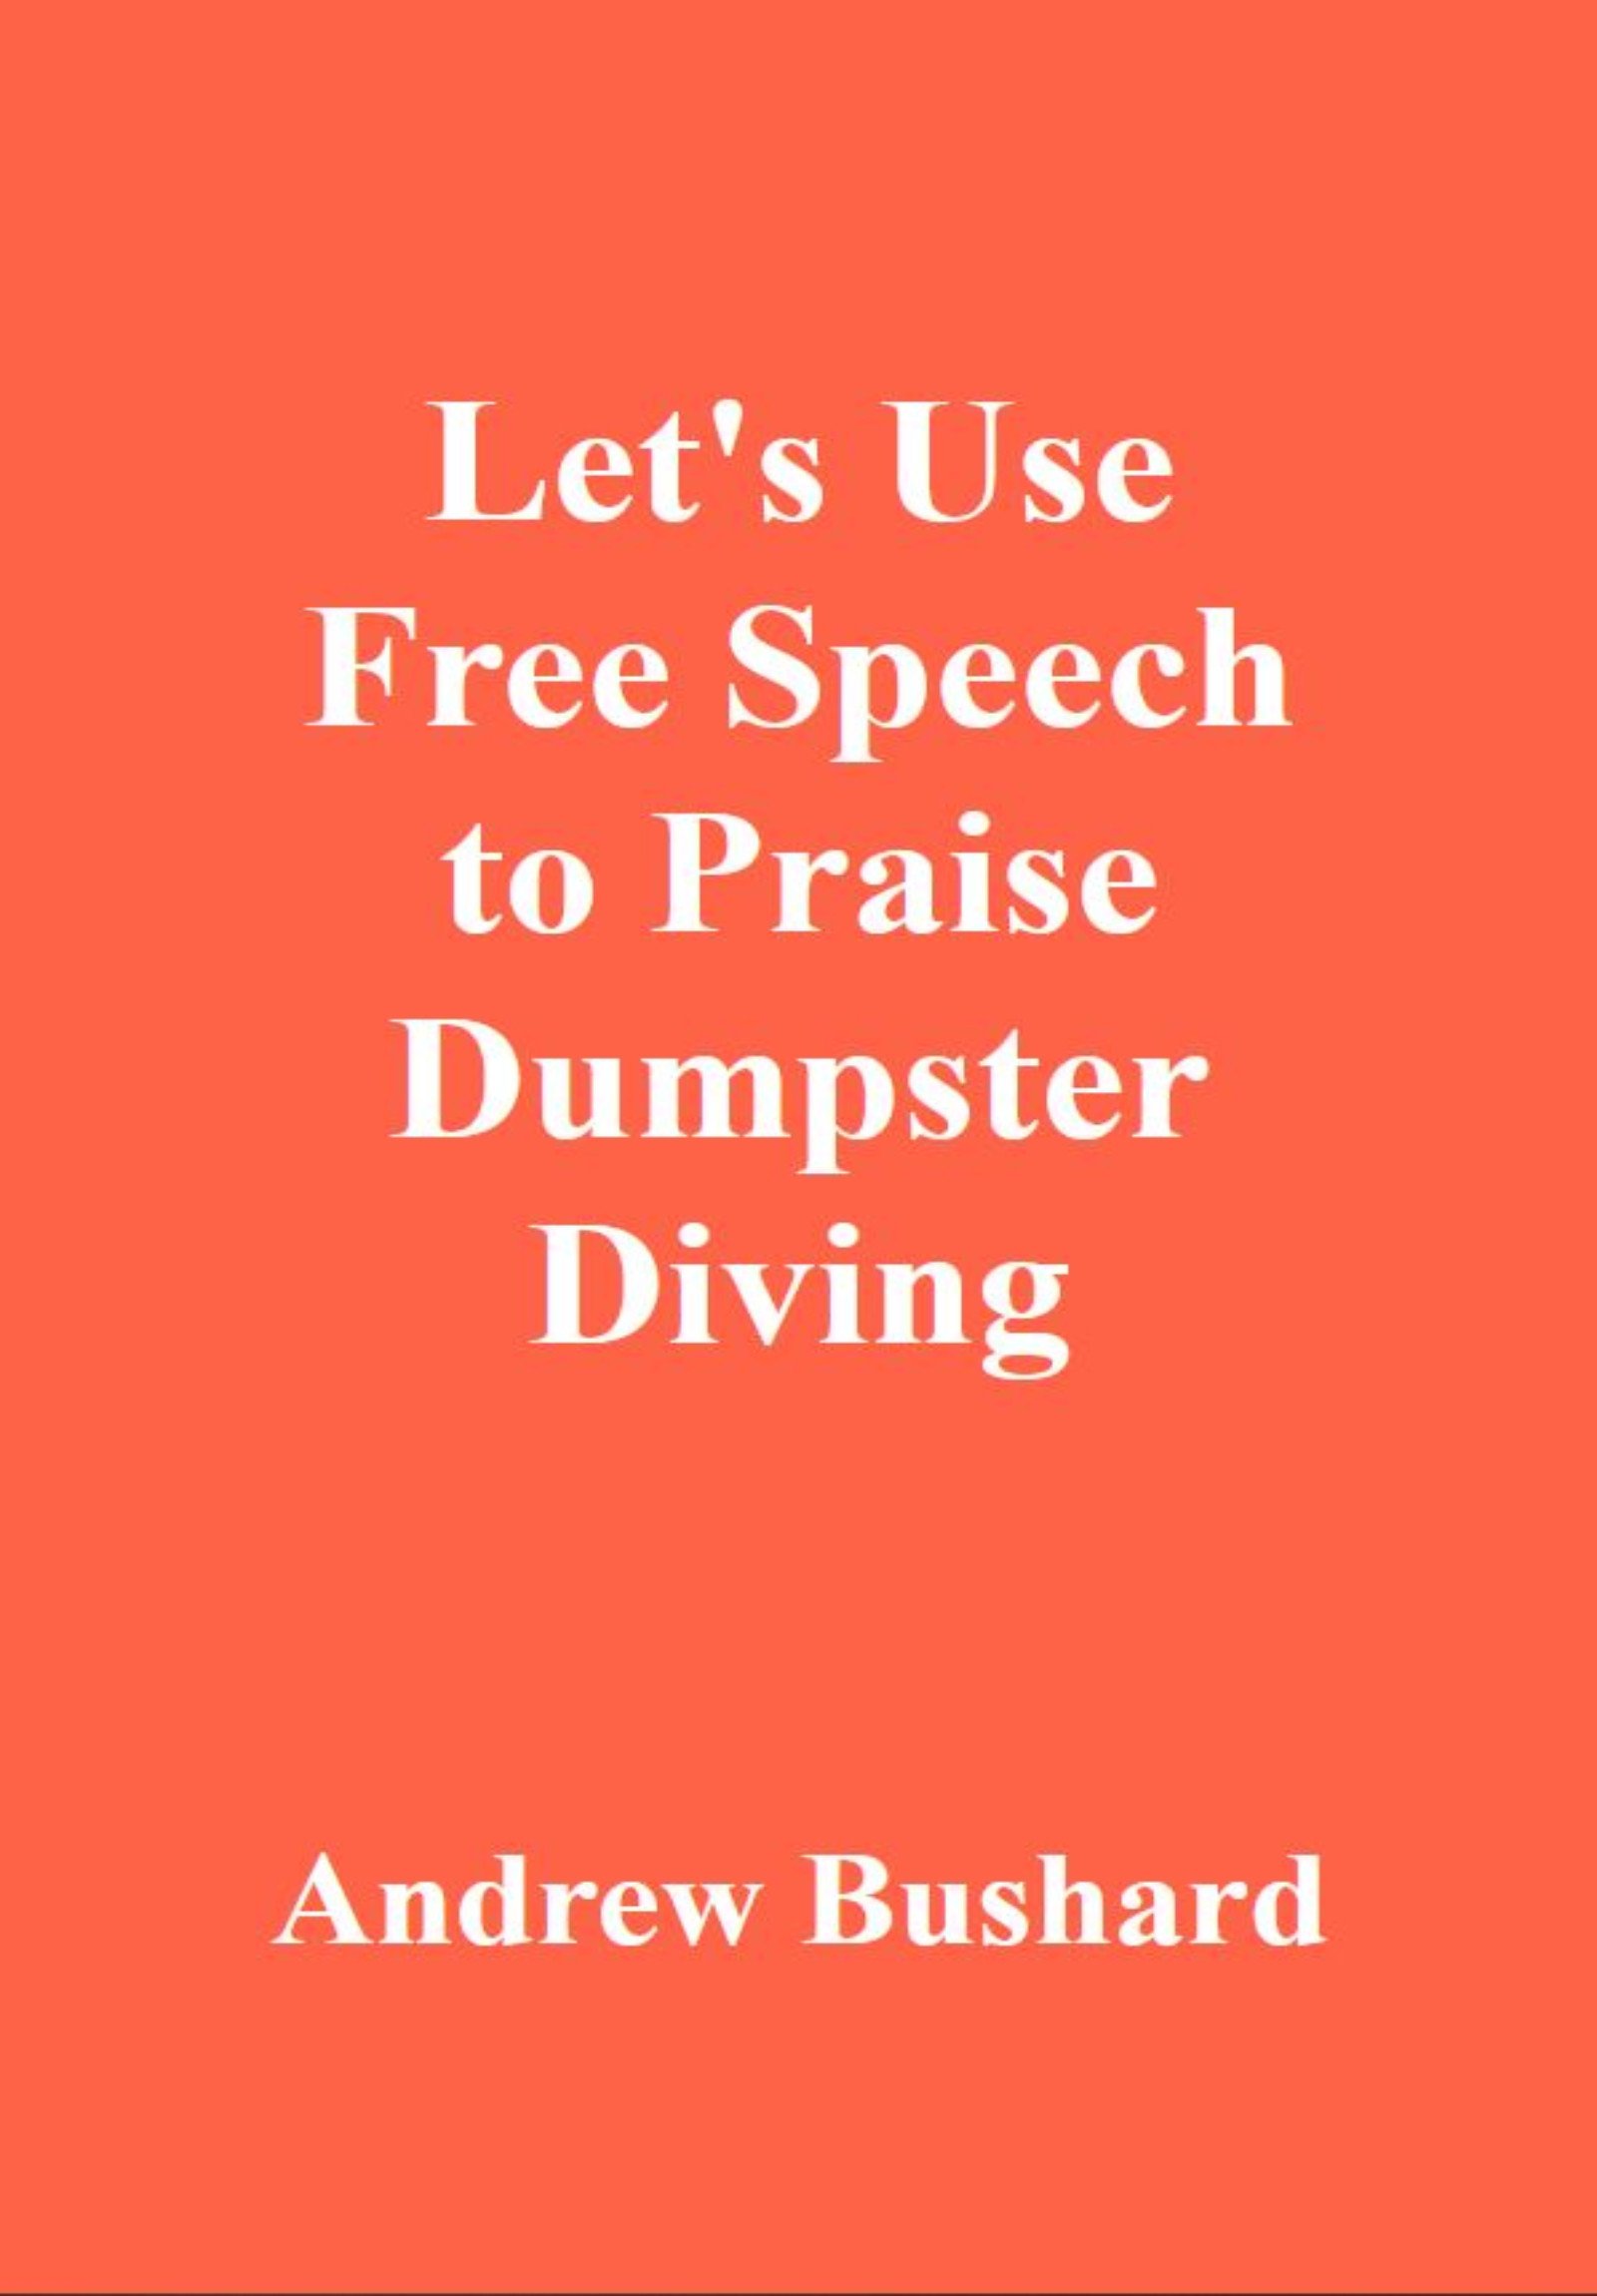 Let's Use Free Speech to Praise Dumpster Diving